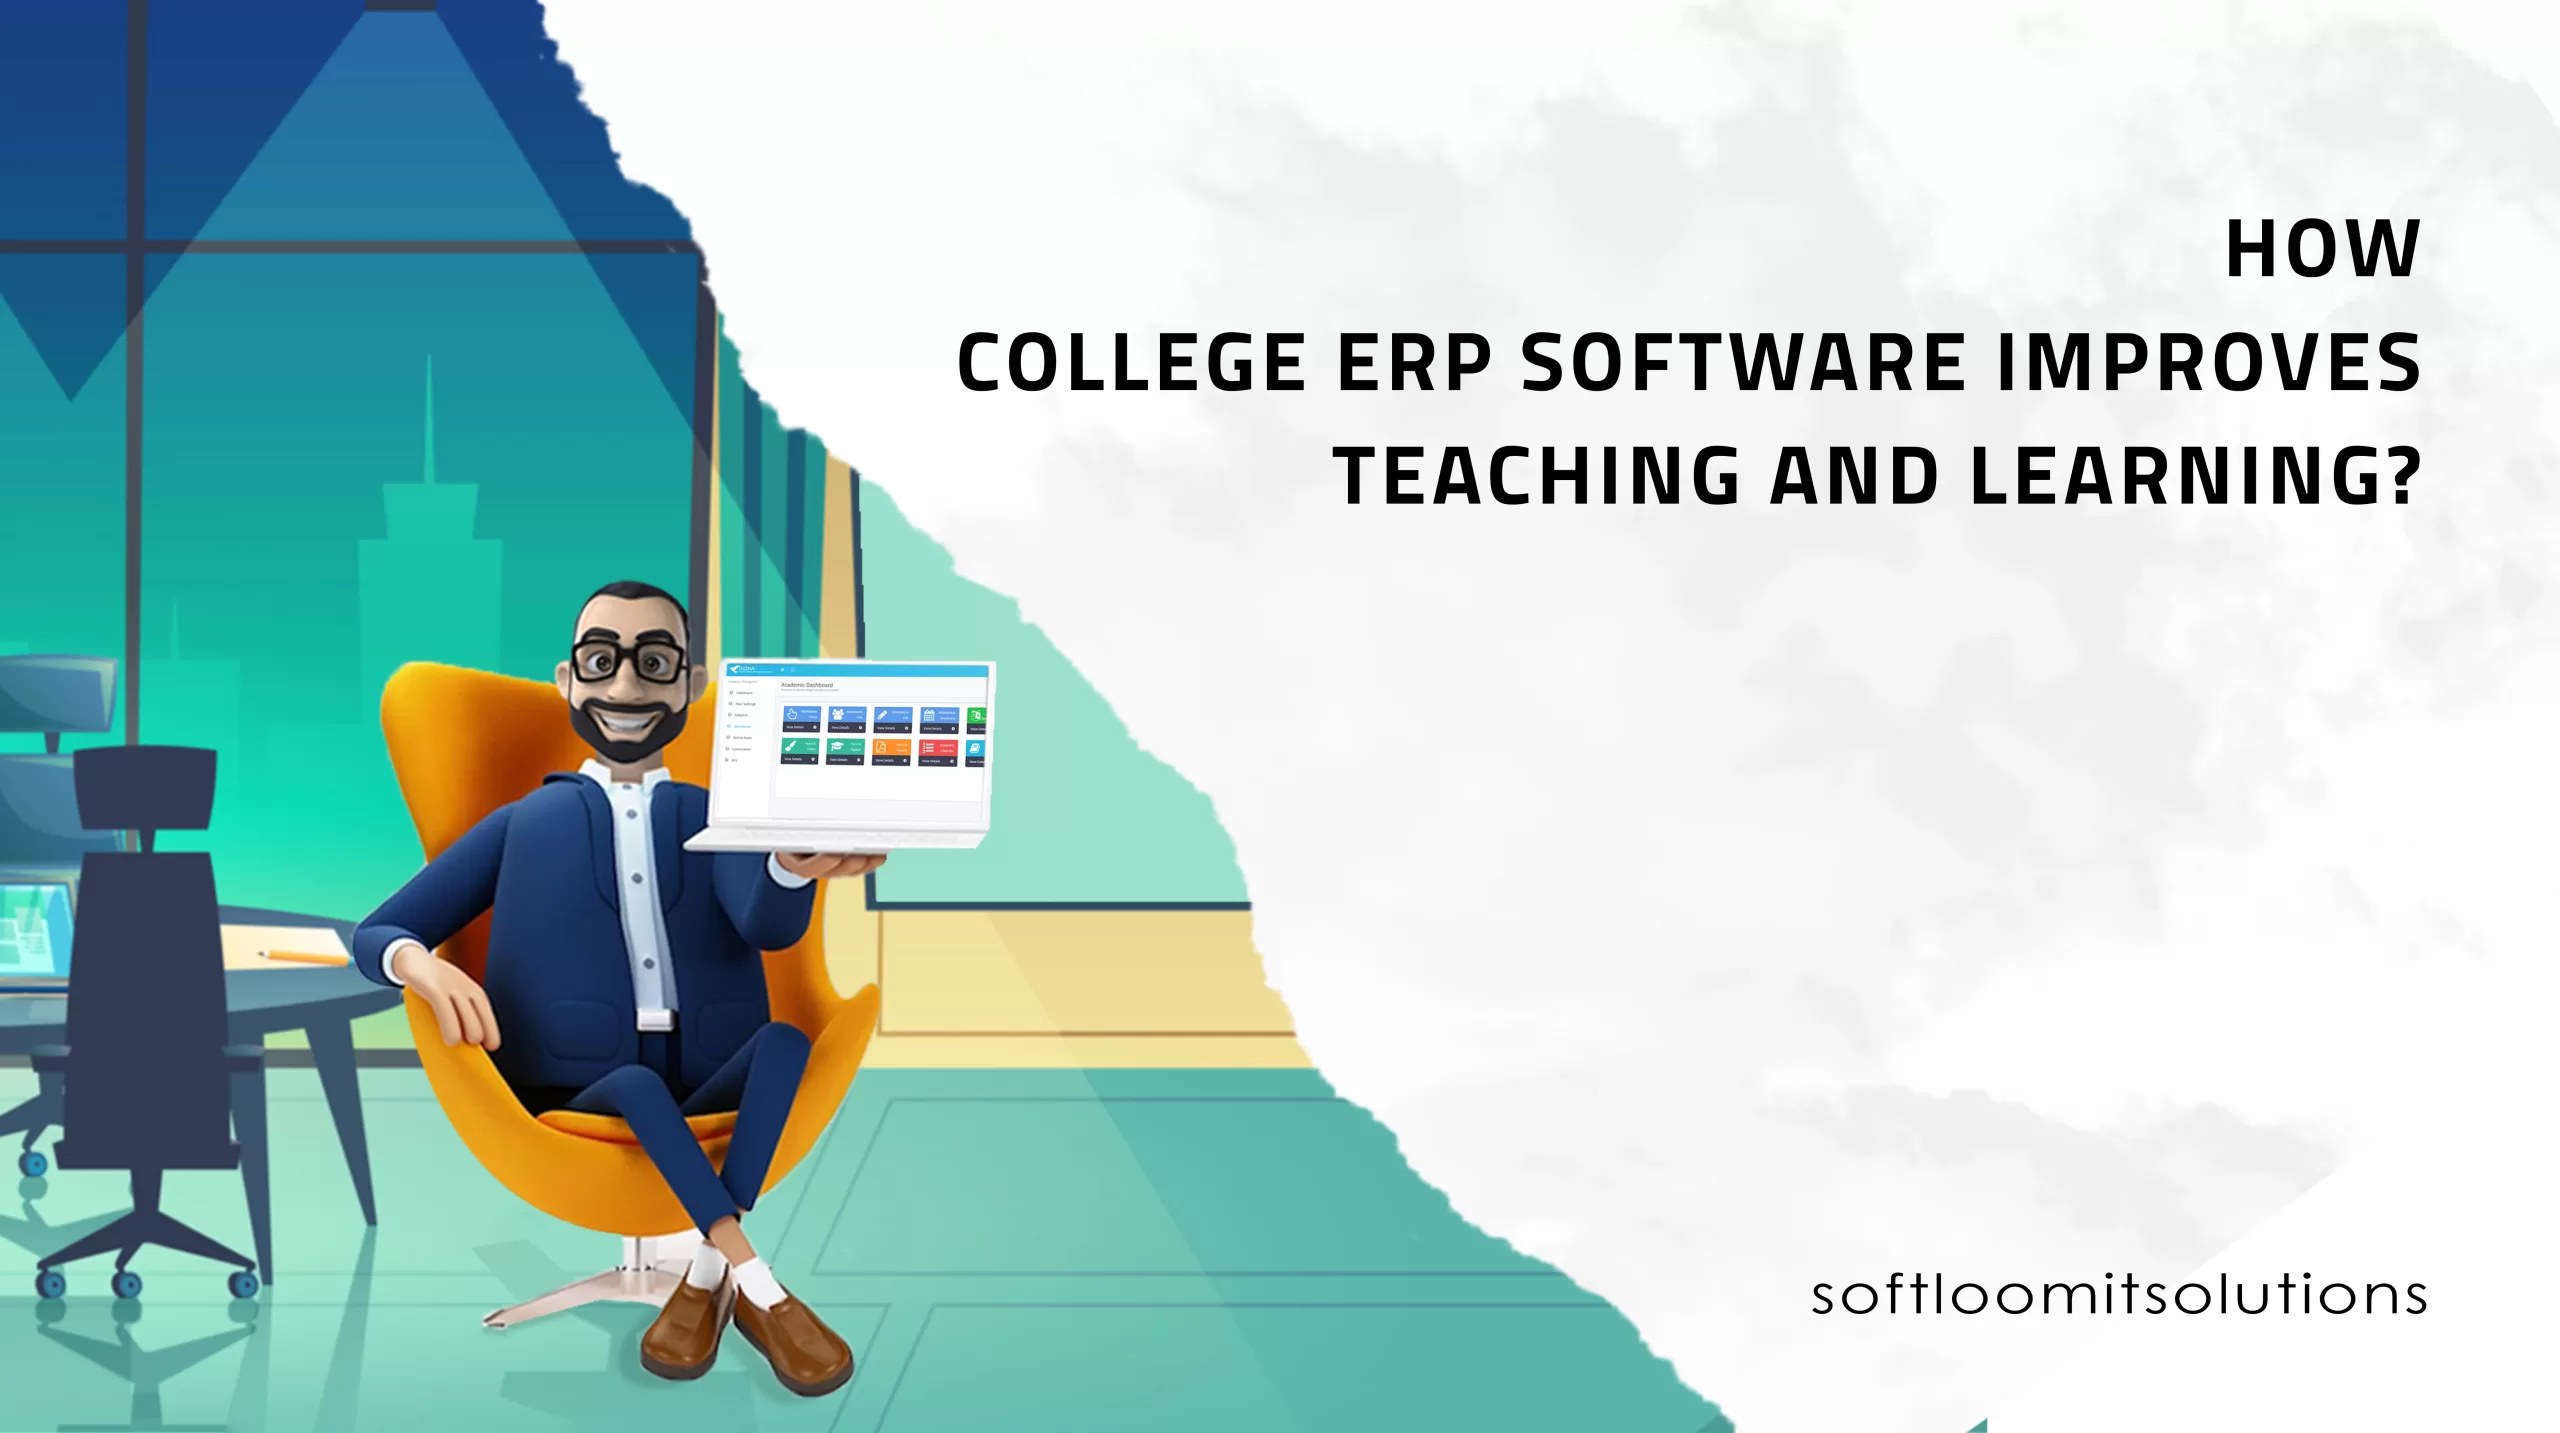 College ERP software for teaching and learning